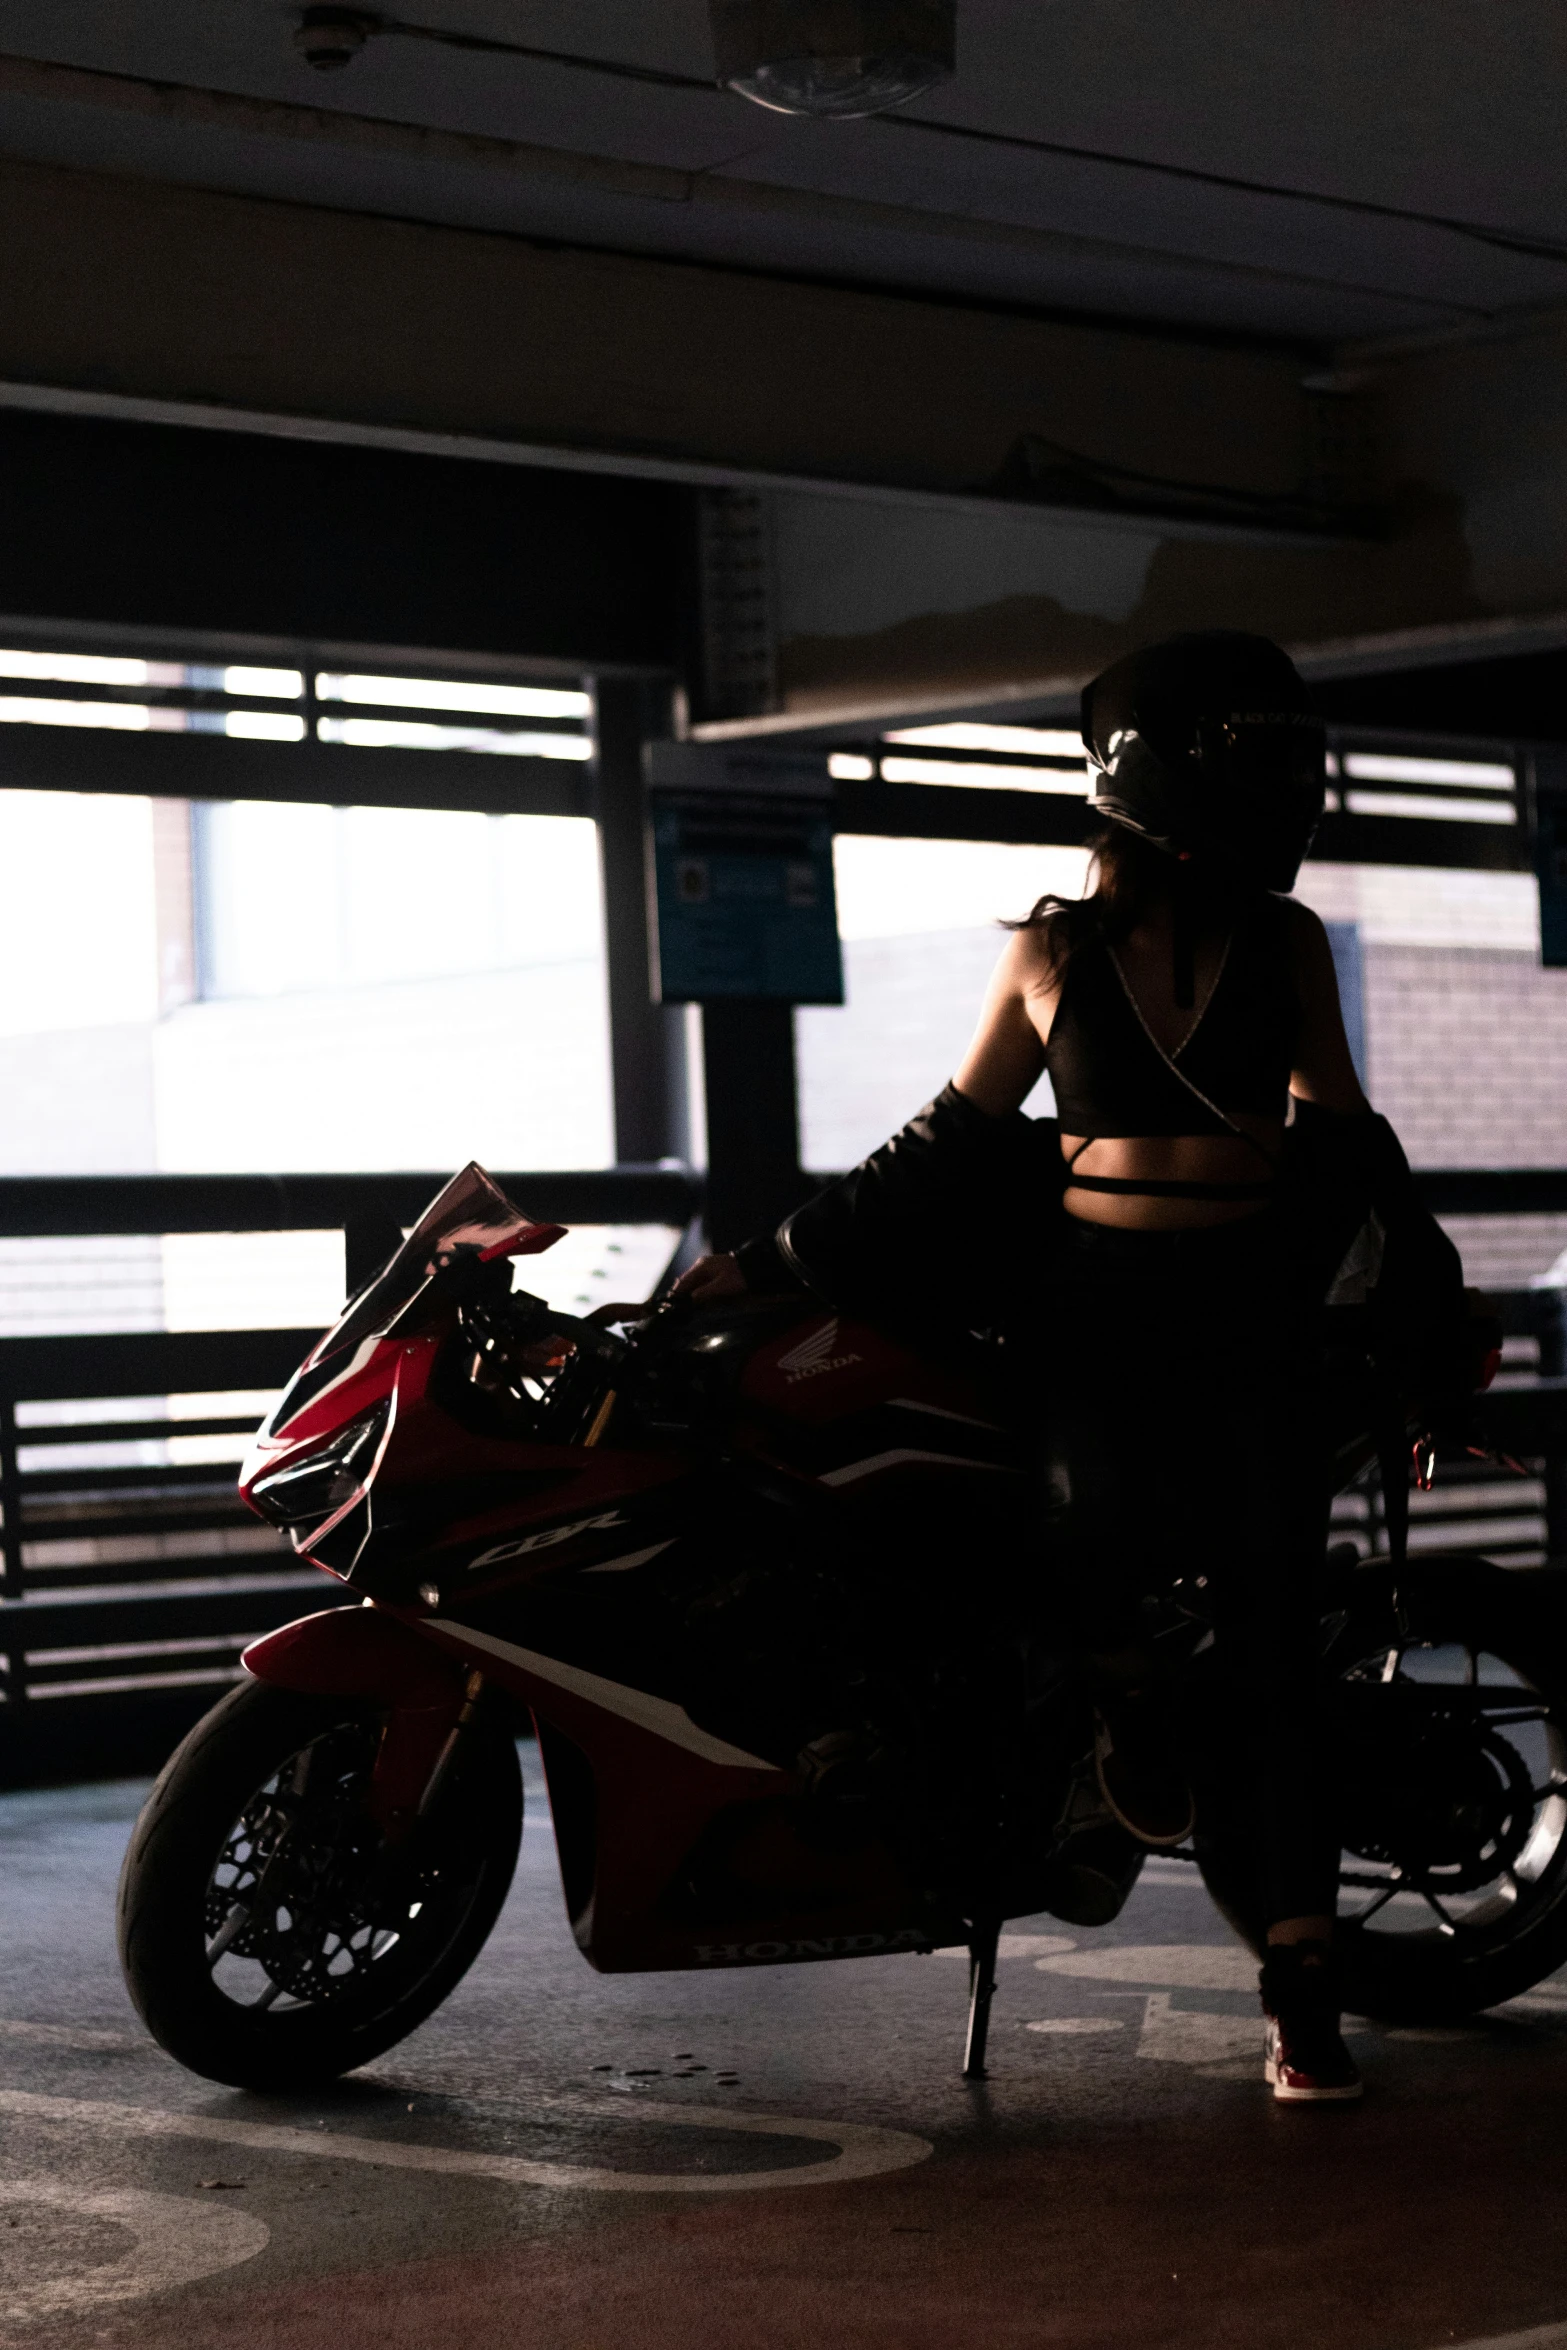 a person sitting on a motorcycle in a large parking garage